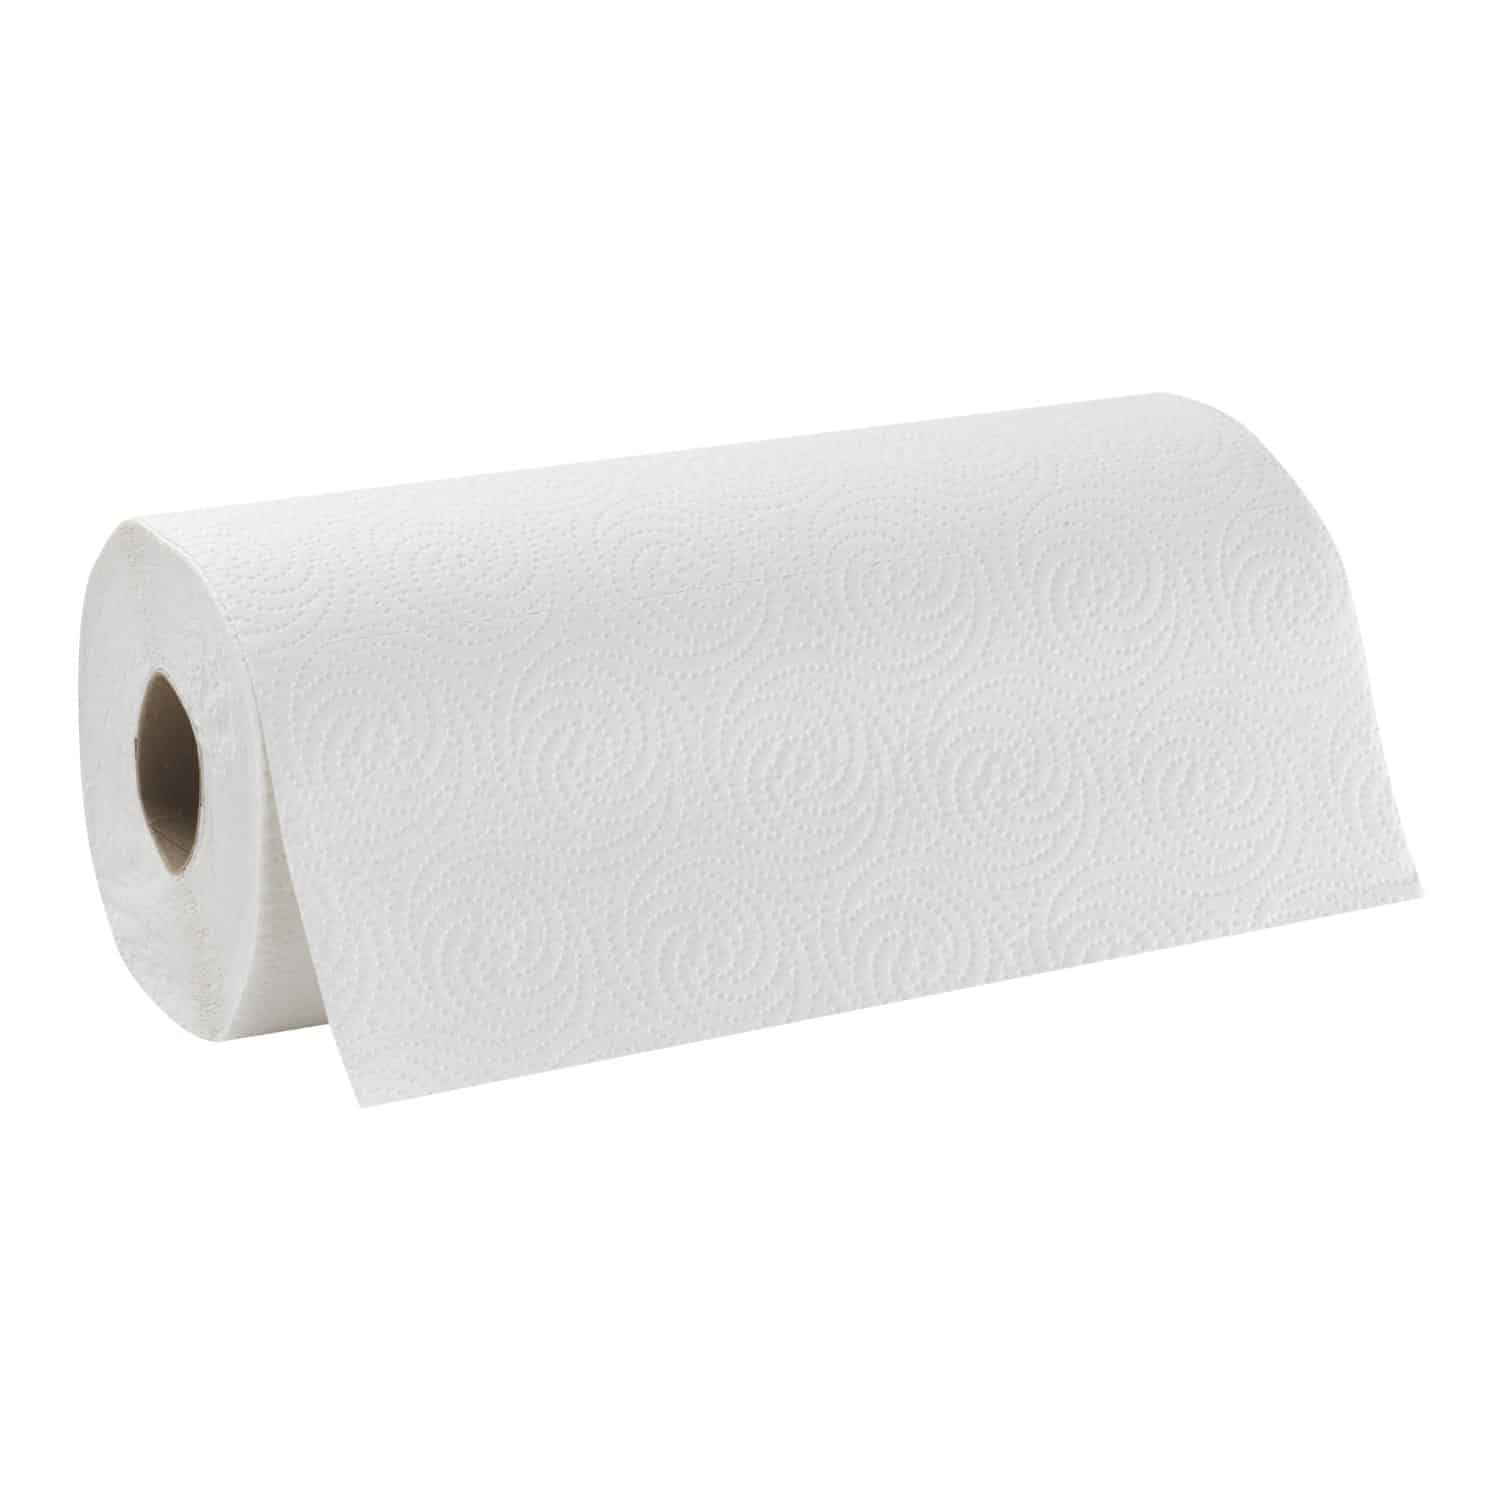  #01079 tree free perforated paper towel roll